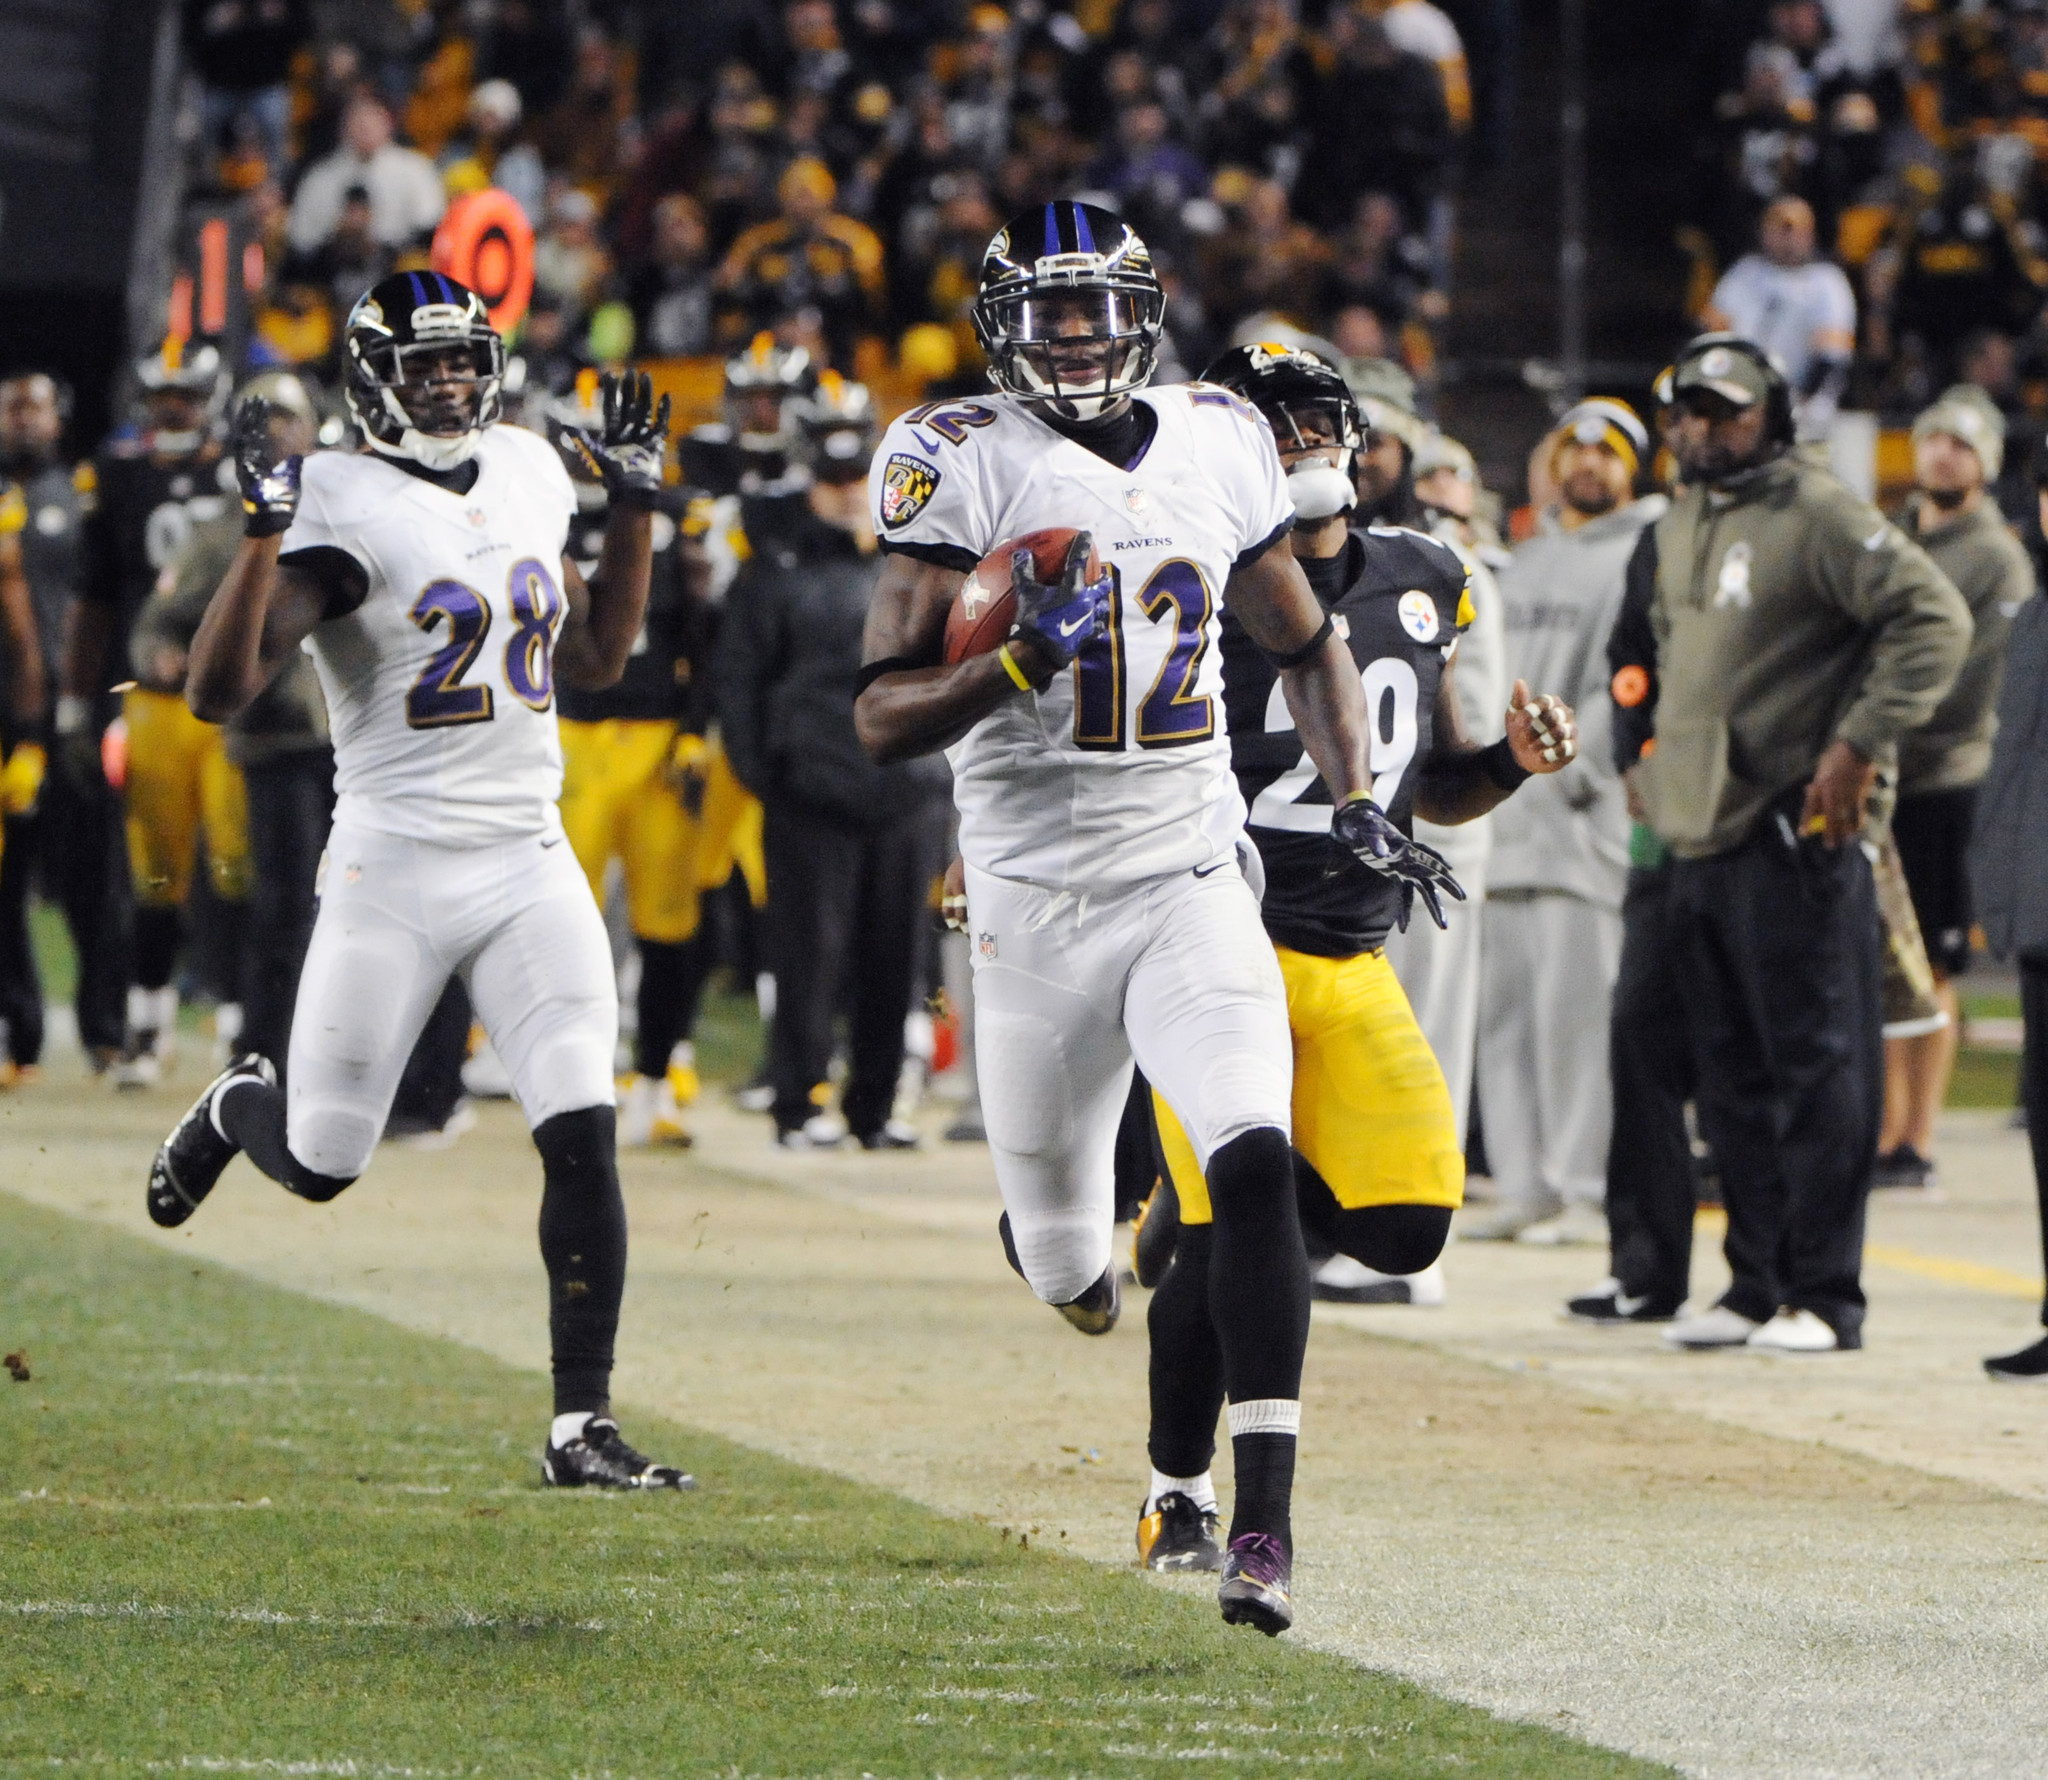 Jacoby Jones, one of the heroes of Super Bowl XLVII victory, returns home to retire as ...2048 x 1780